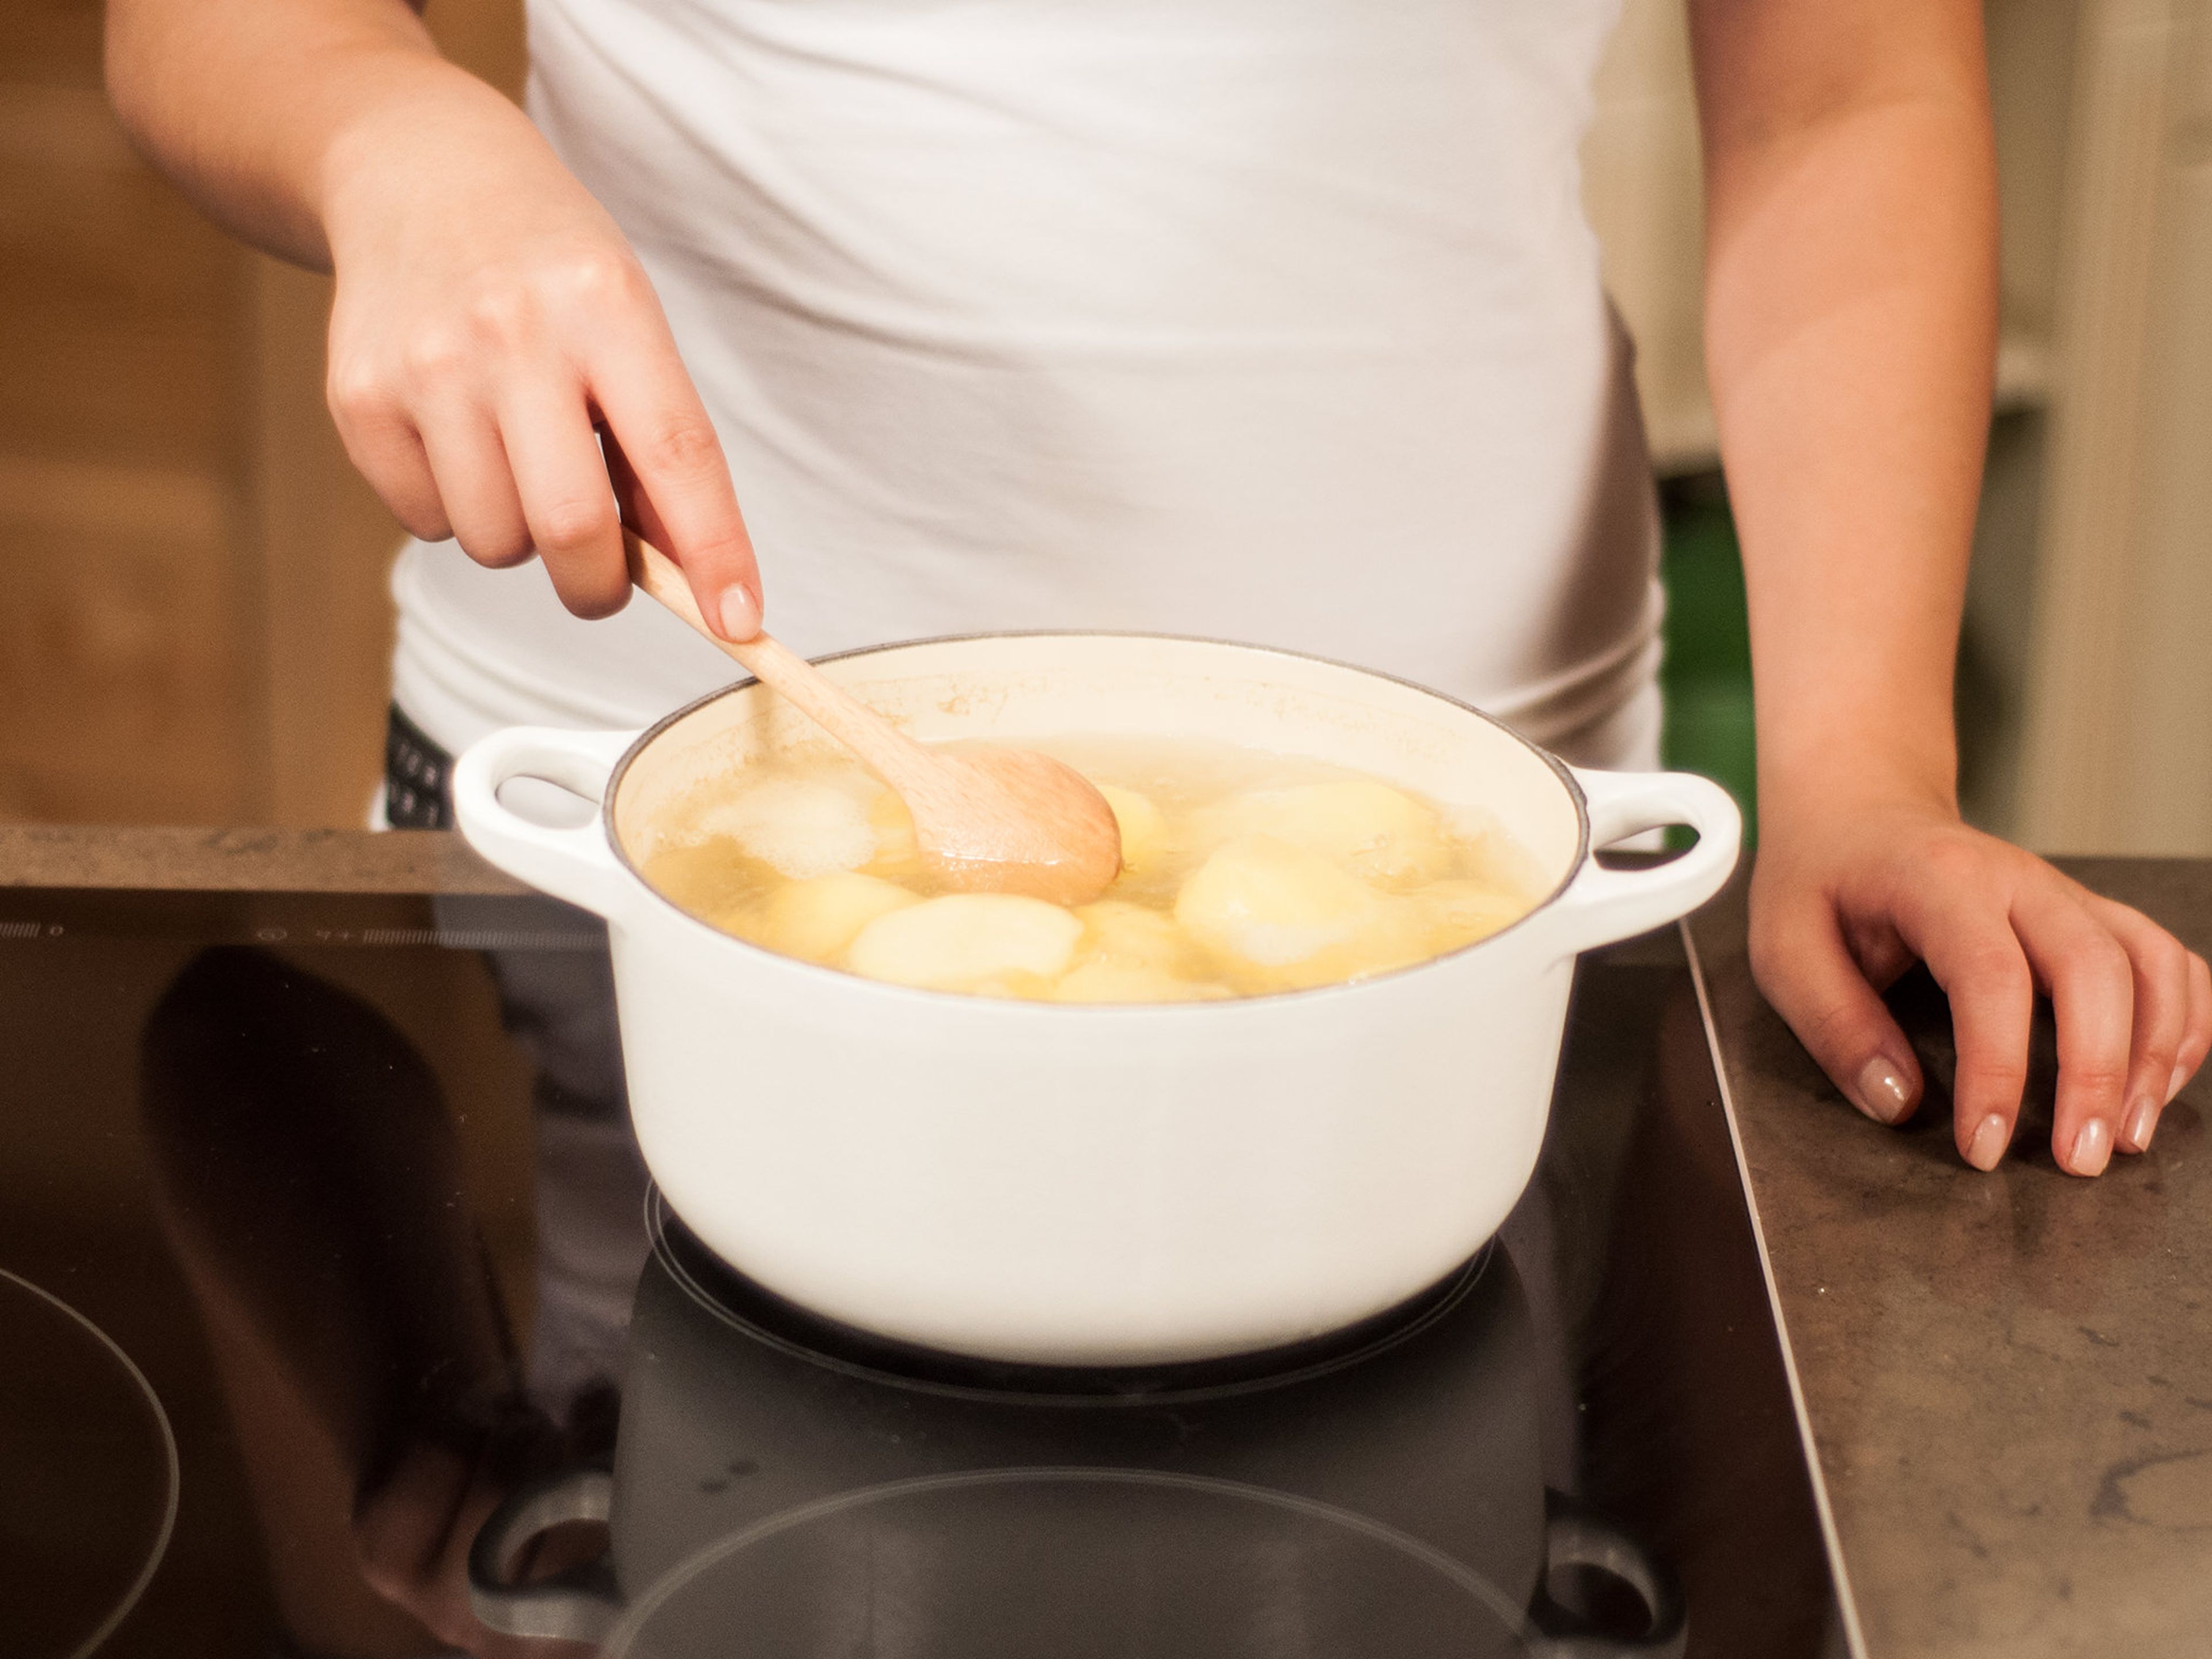 Transfer potatoes to a large saucepan. Cover with water, add some salt, and bring to a boil. Then reduce to a simmer and cook for approx. 20 – 30 min. until tender. Drain and set aside to cool for approx. 15 min.